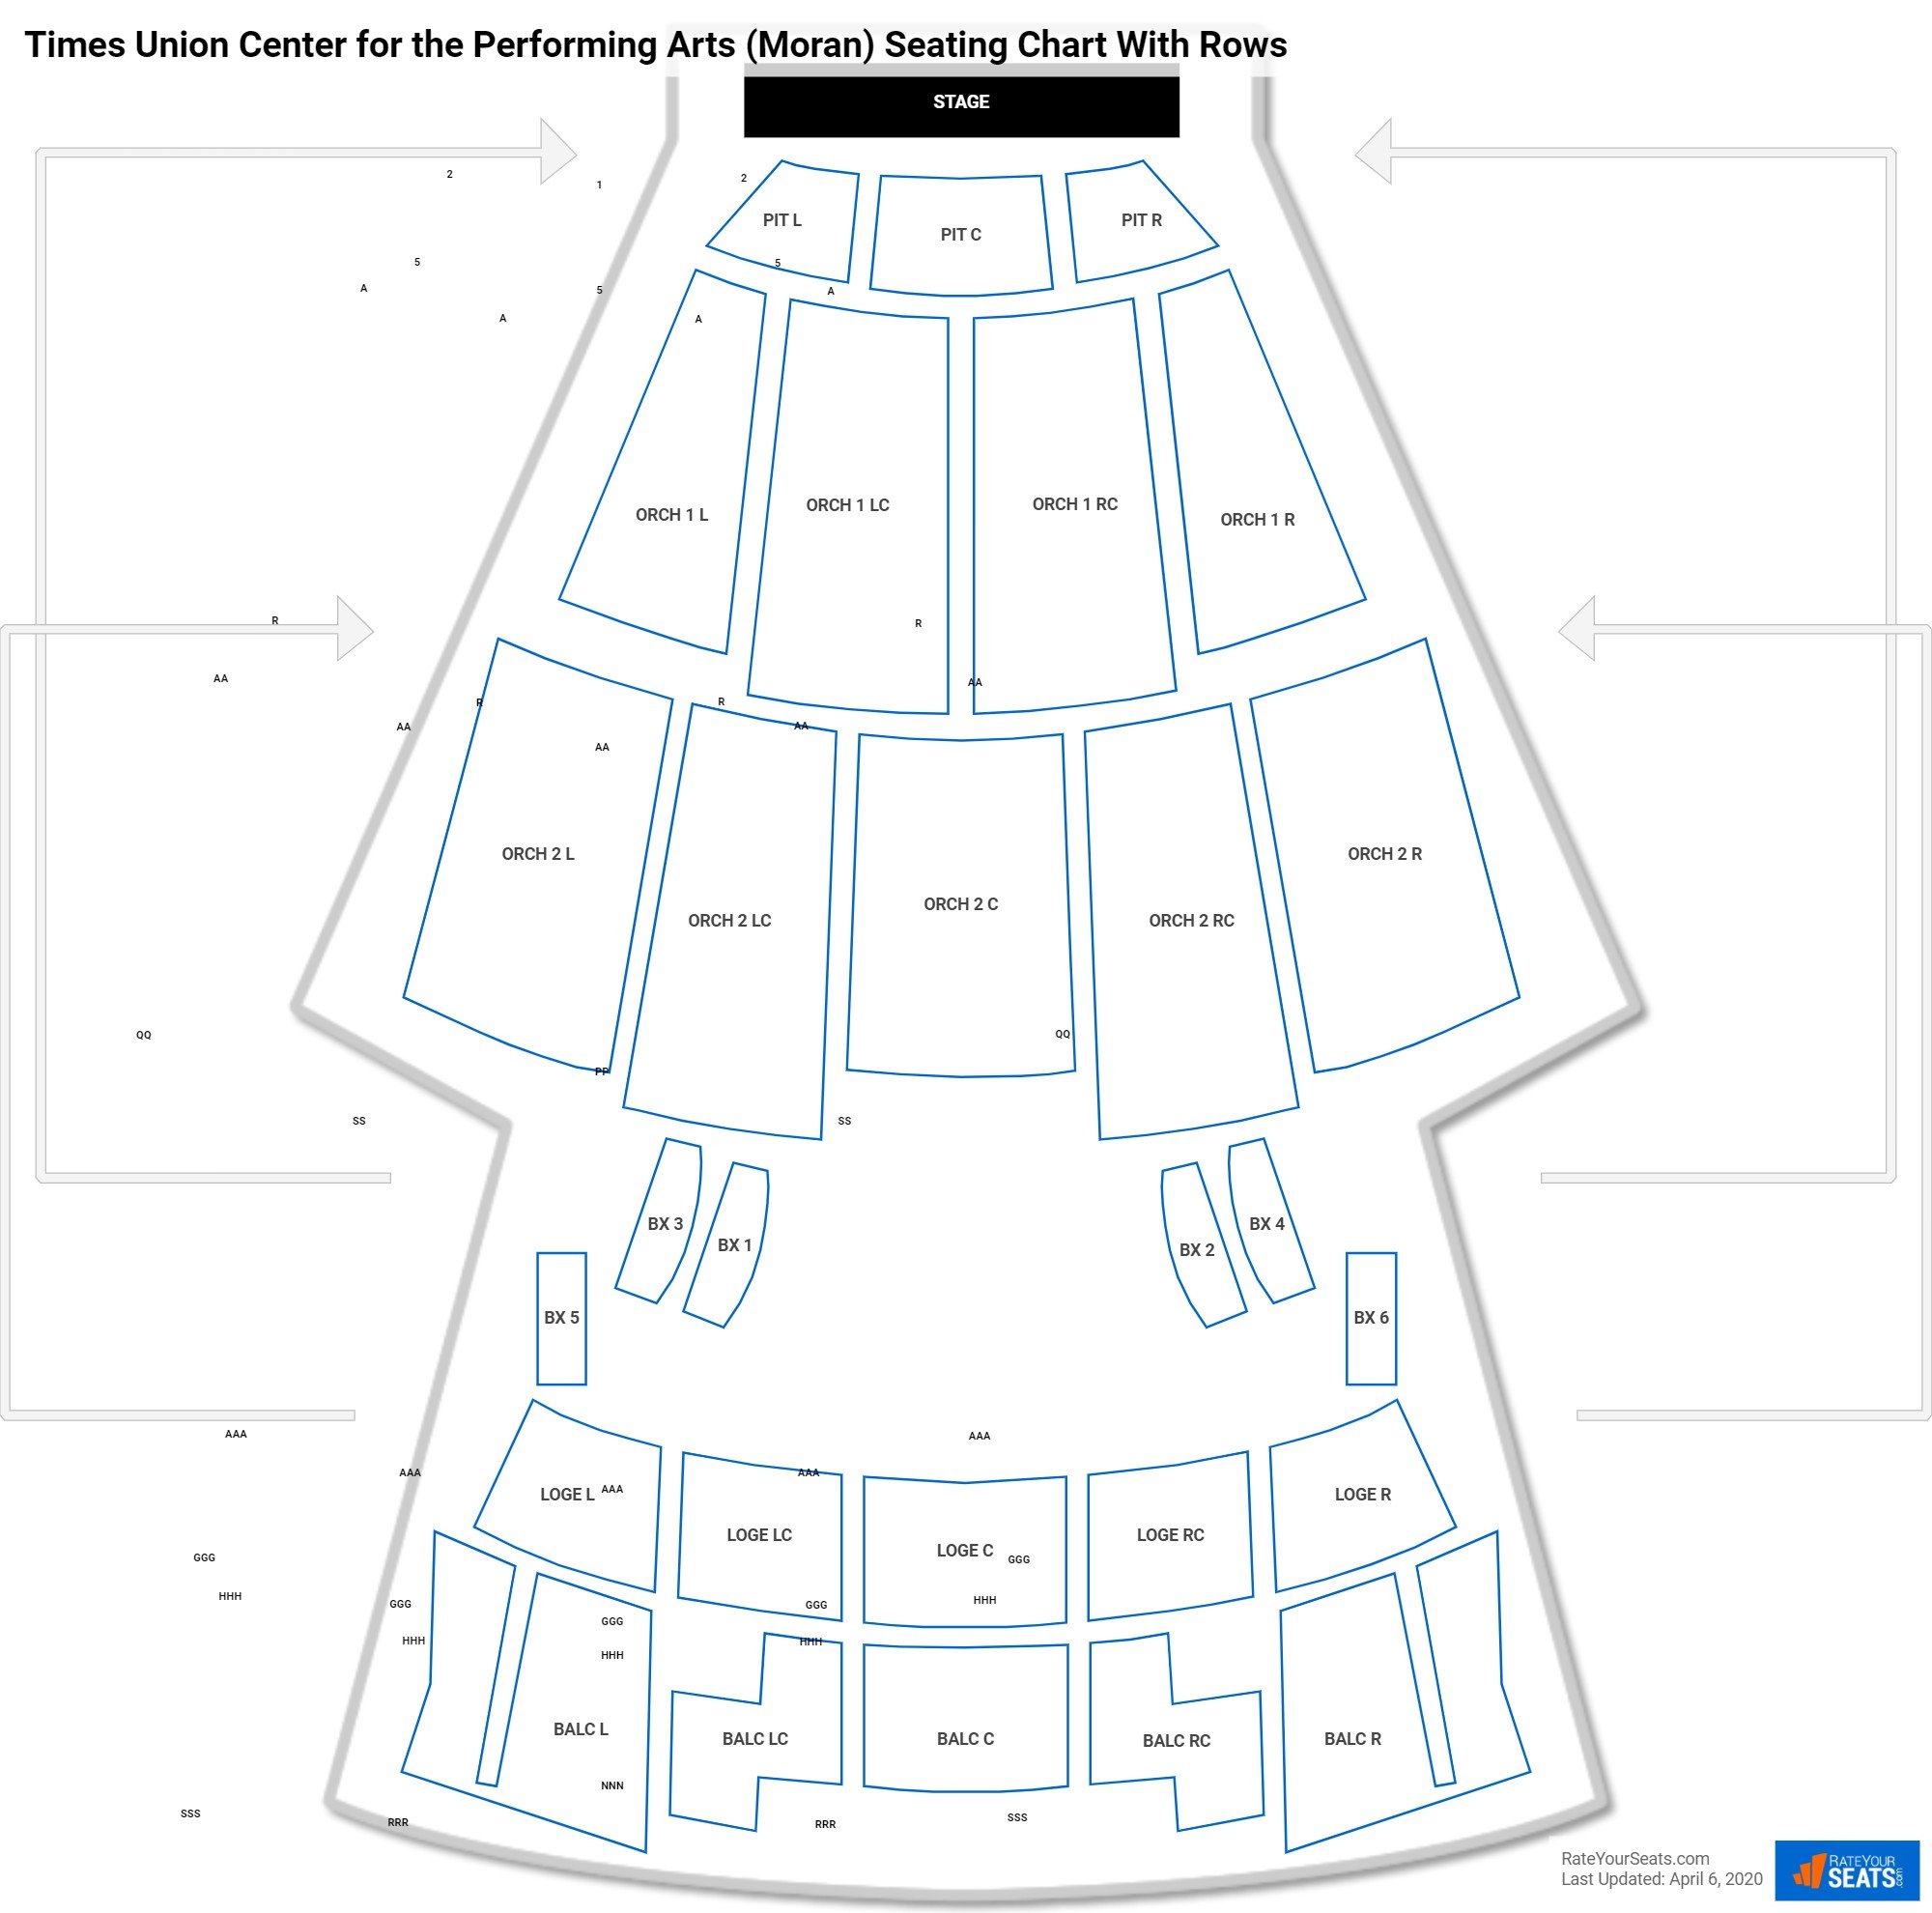 Times Union Center for the Performing Arts (Moran) seating chart with row numbers